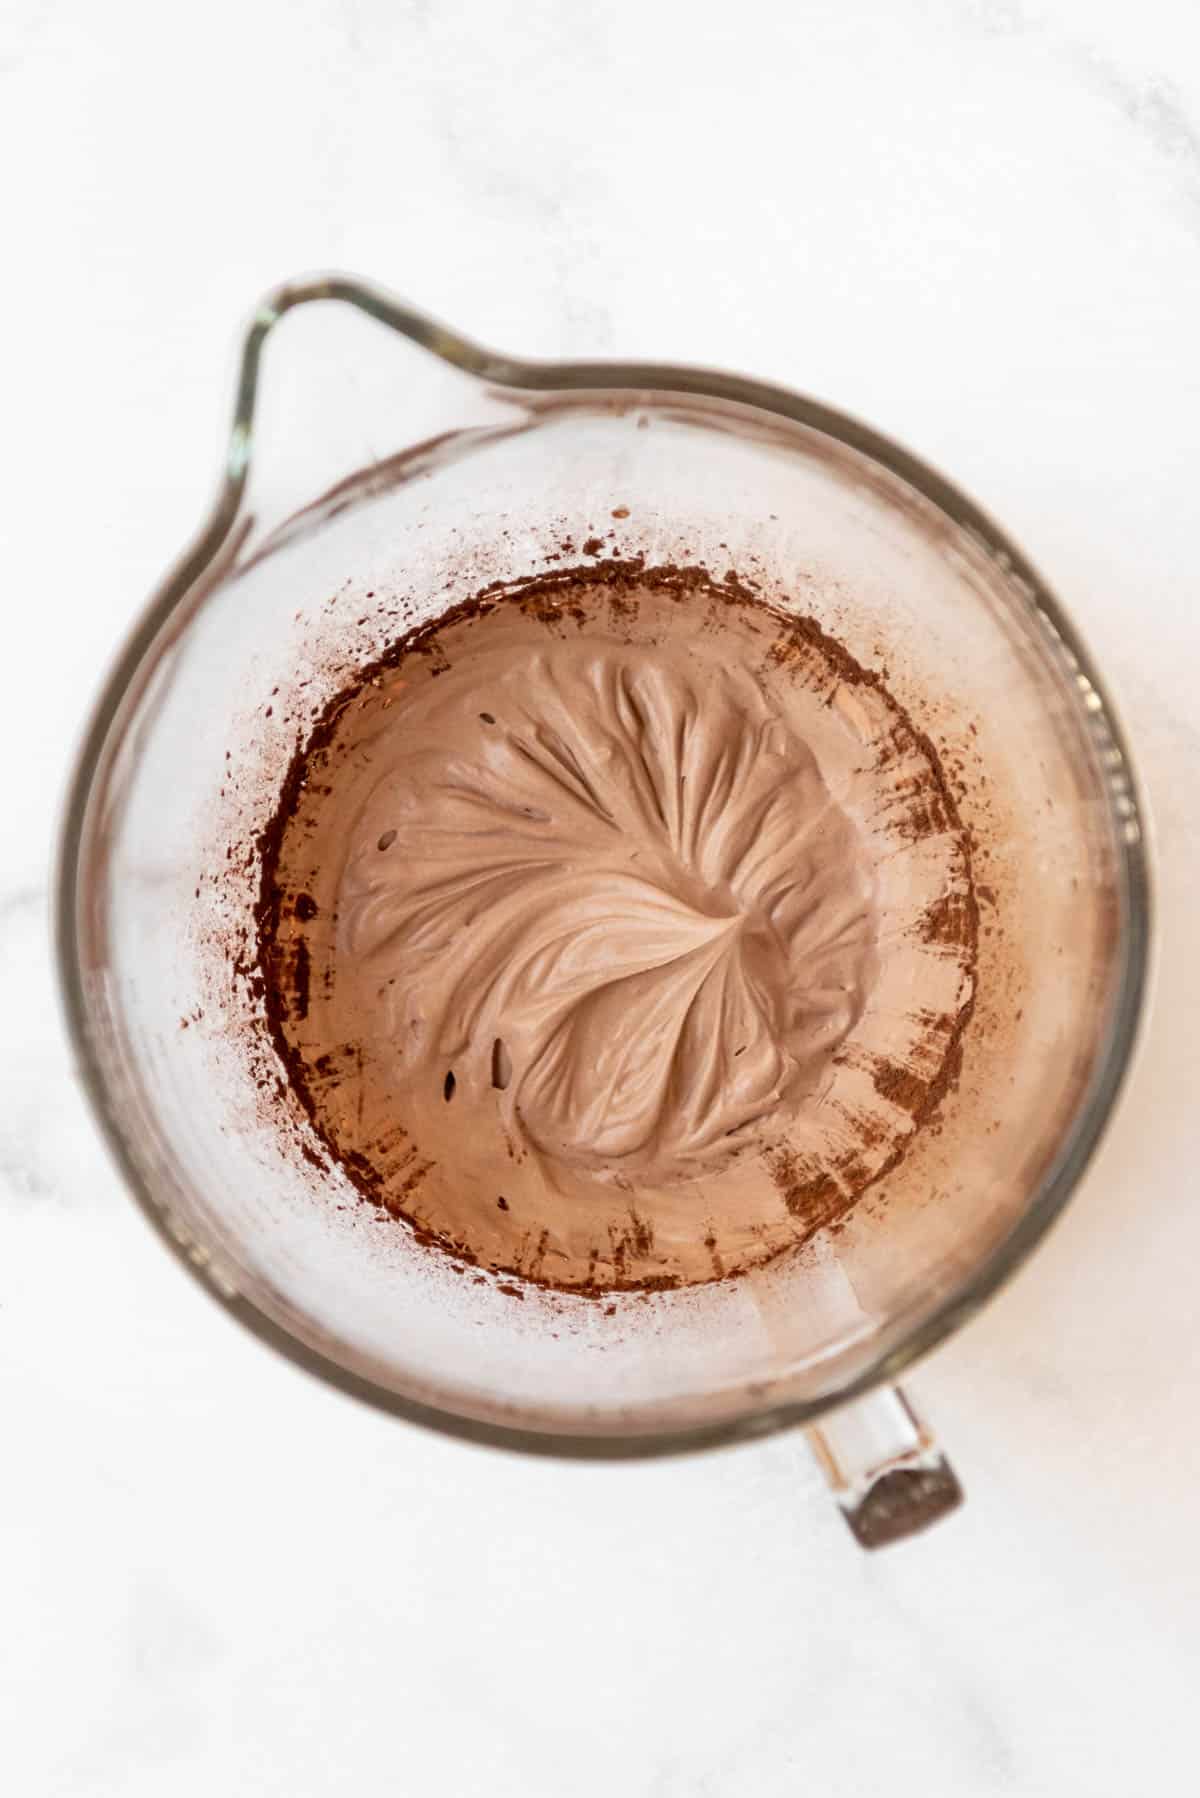 Chocolate whipped cream in a glass mixing bowl with cocoa powder around the edges that needs to be mixed in.